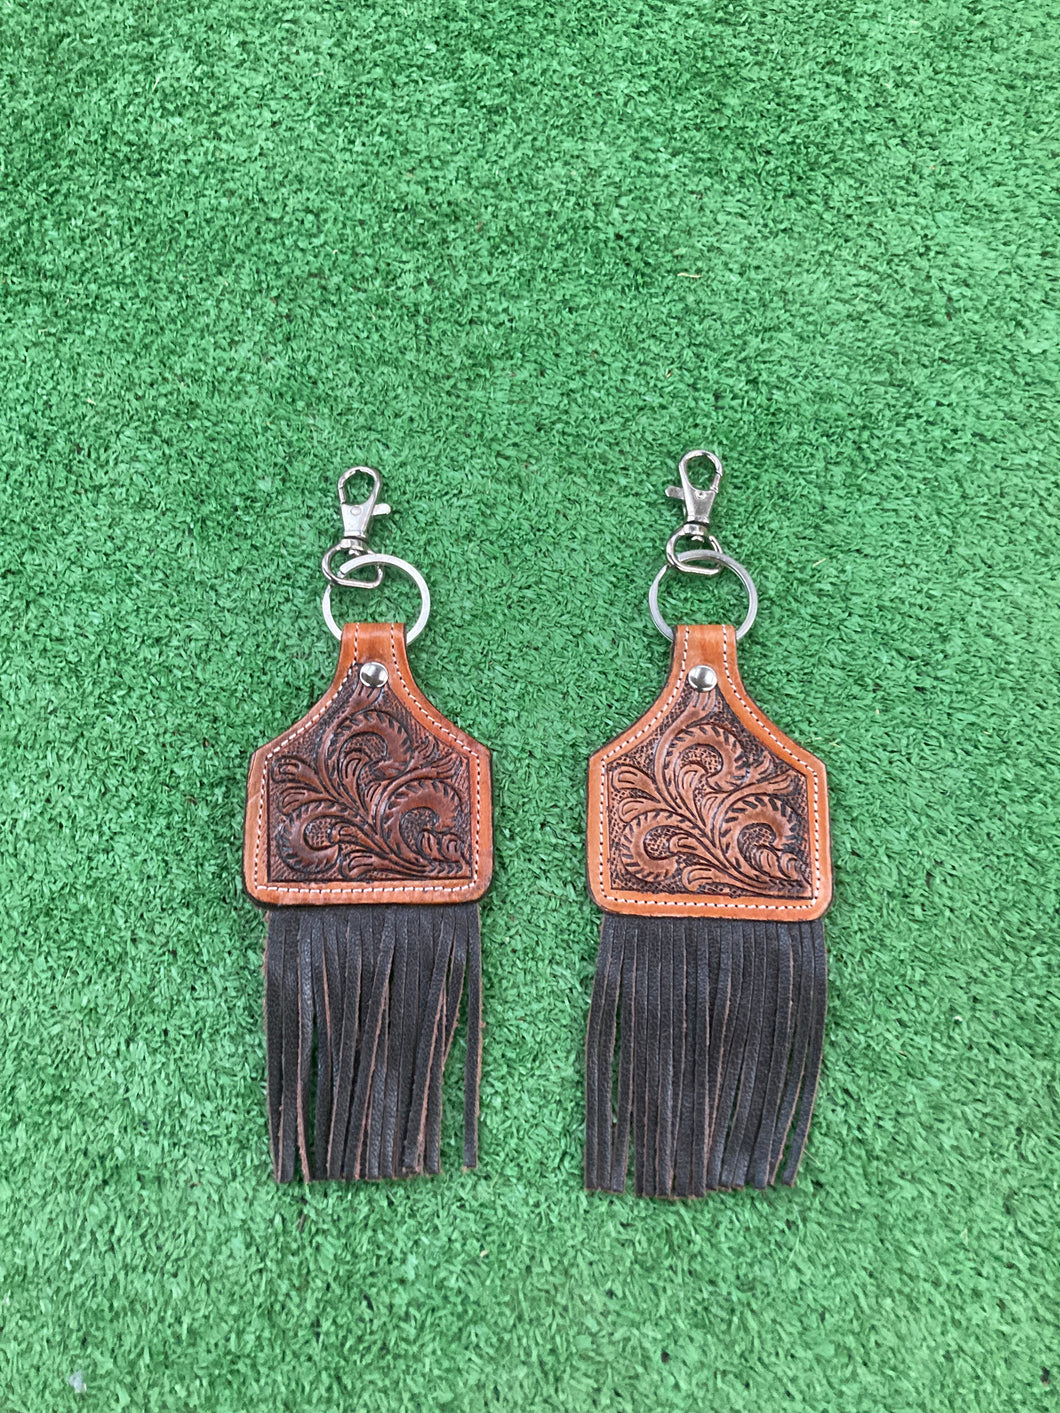 Leather Keychains